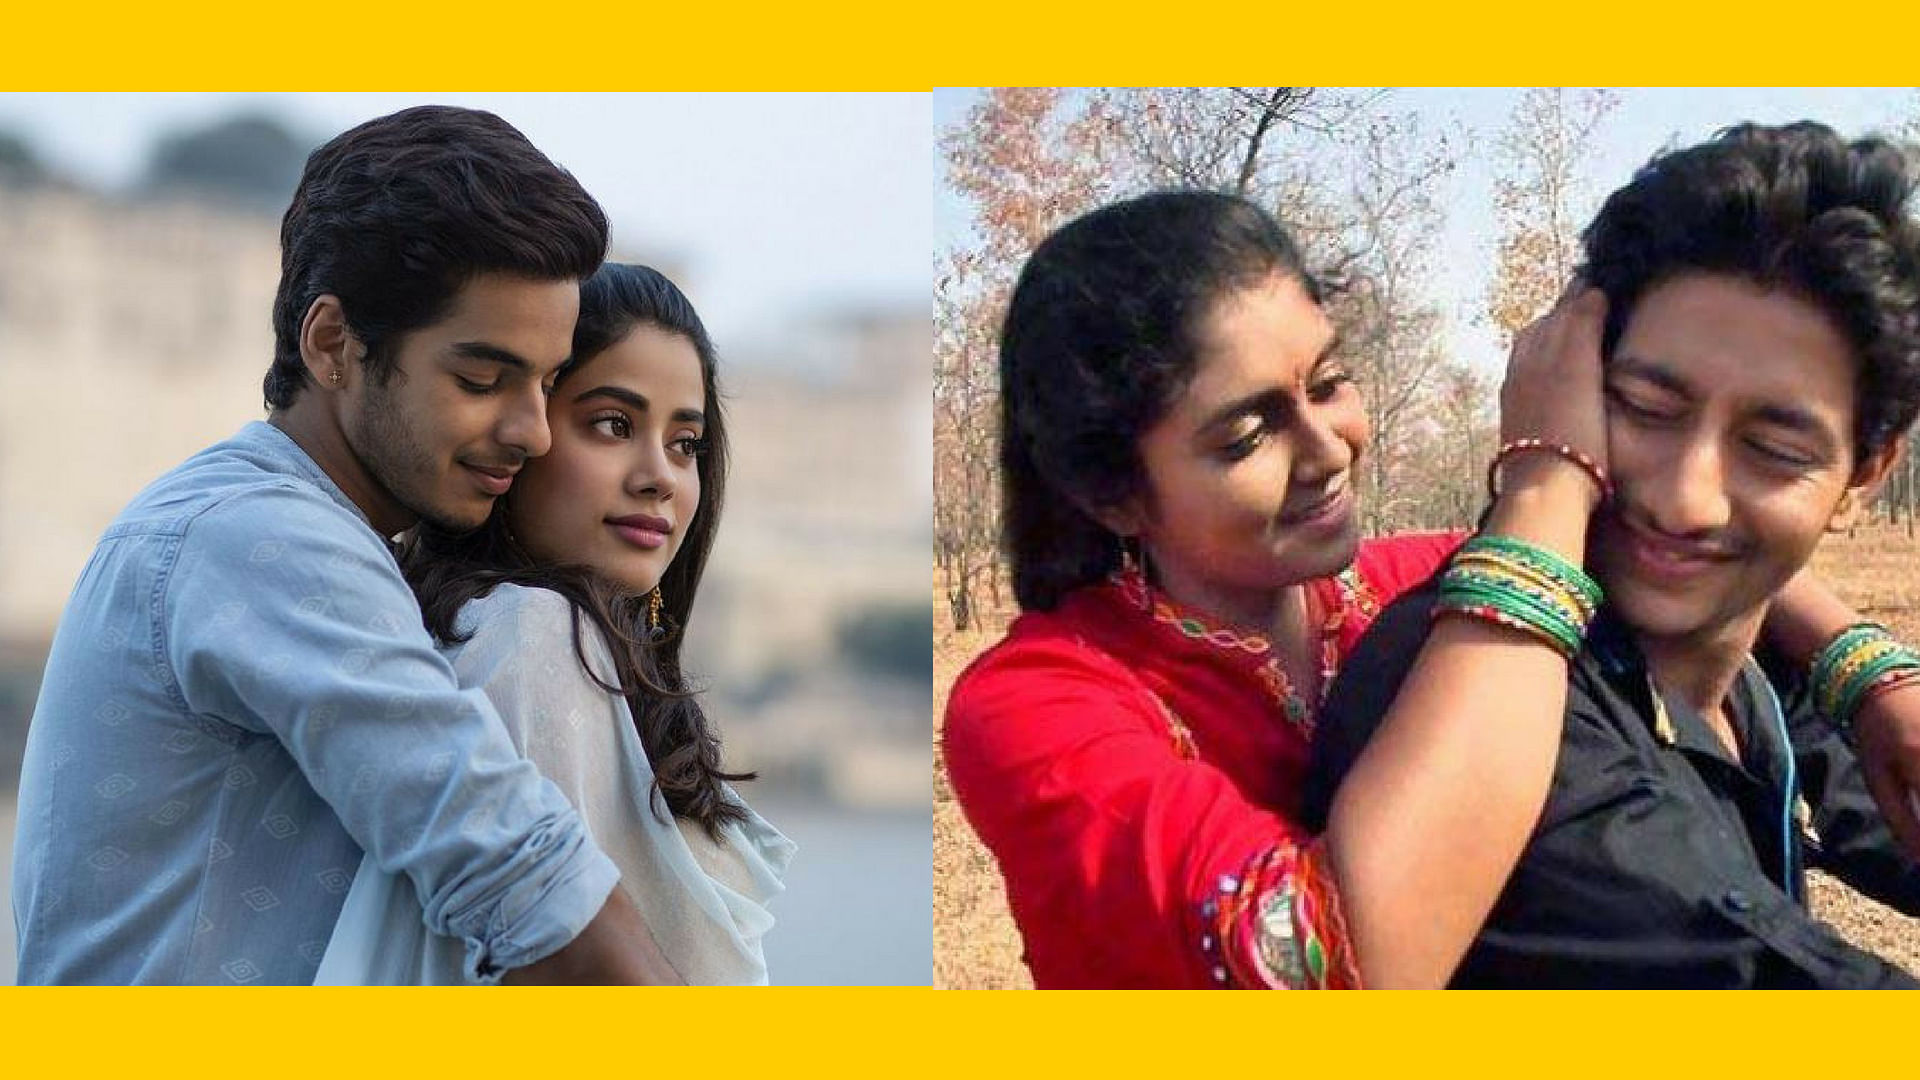 The two lead pairs of <i>Dhadak</i> and <i>Sairat</i>, respectively in stills from the posters.